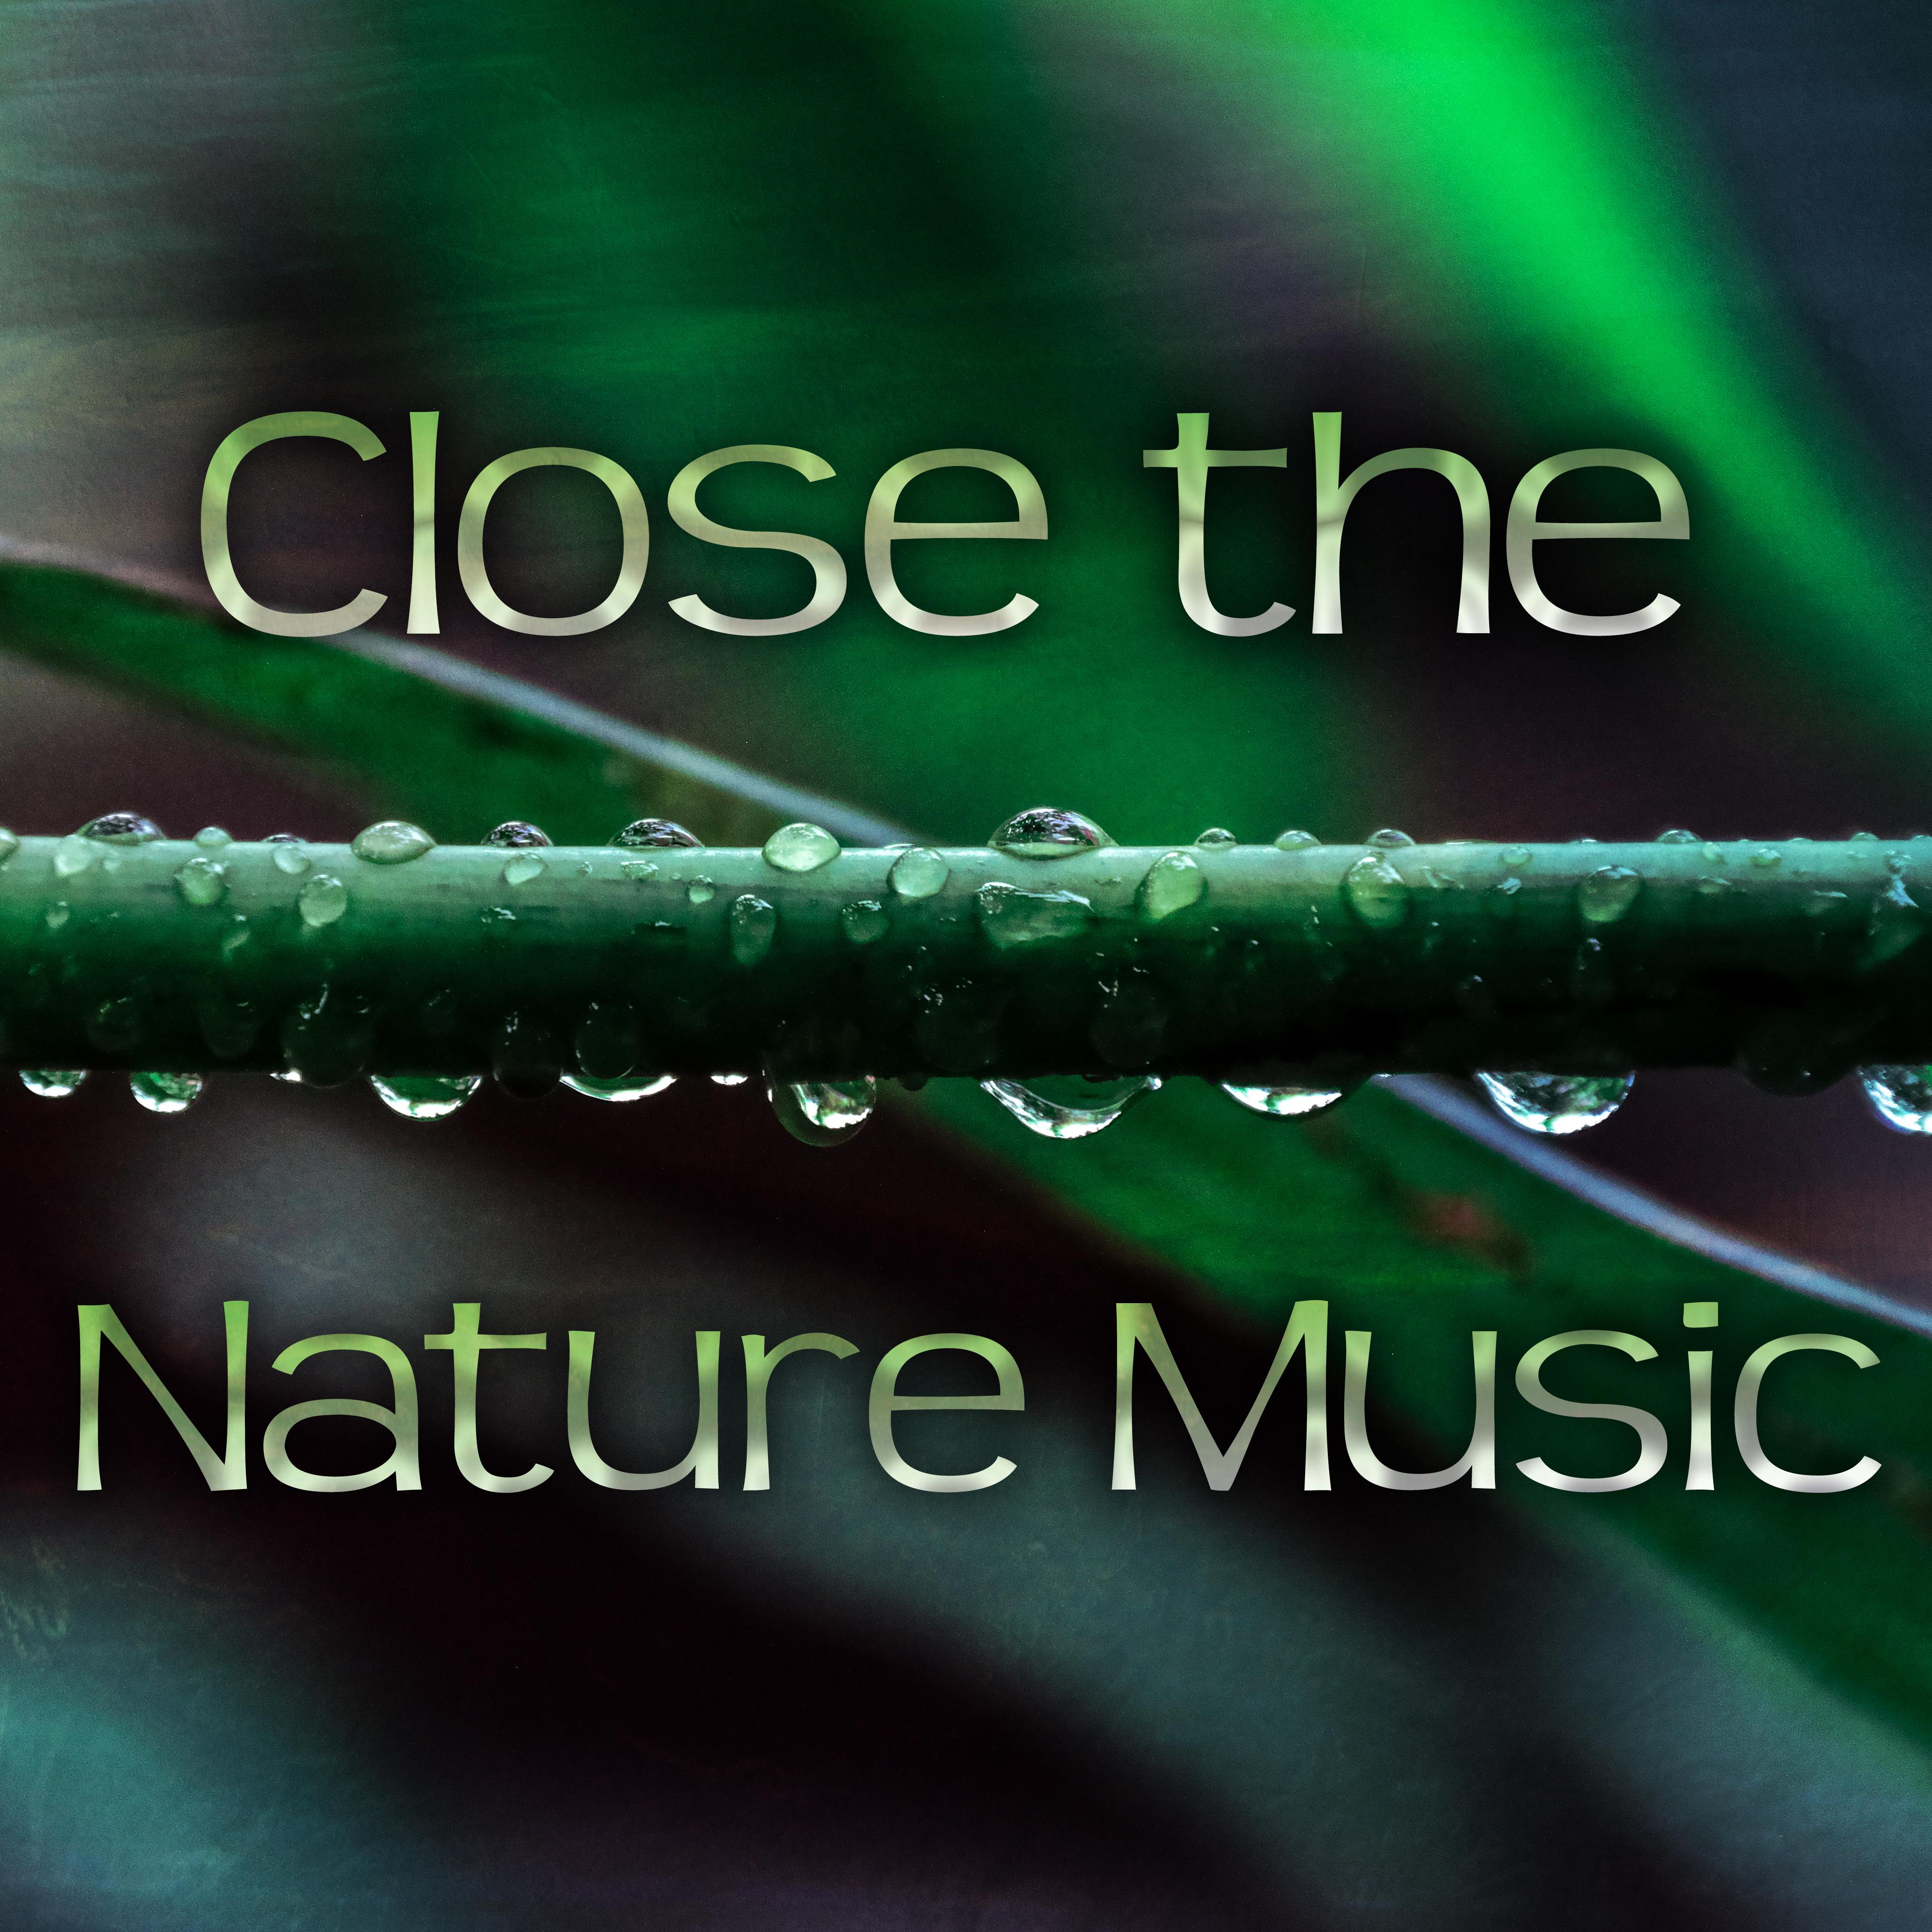 Close the Nature Music – New Age Music for Total Relaxation, Massage Therapy, Yoga, Pilates, Spa, Nature Sounds